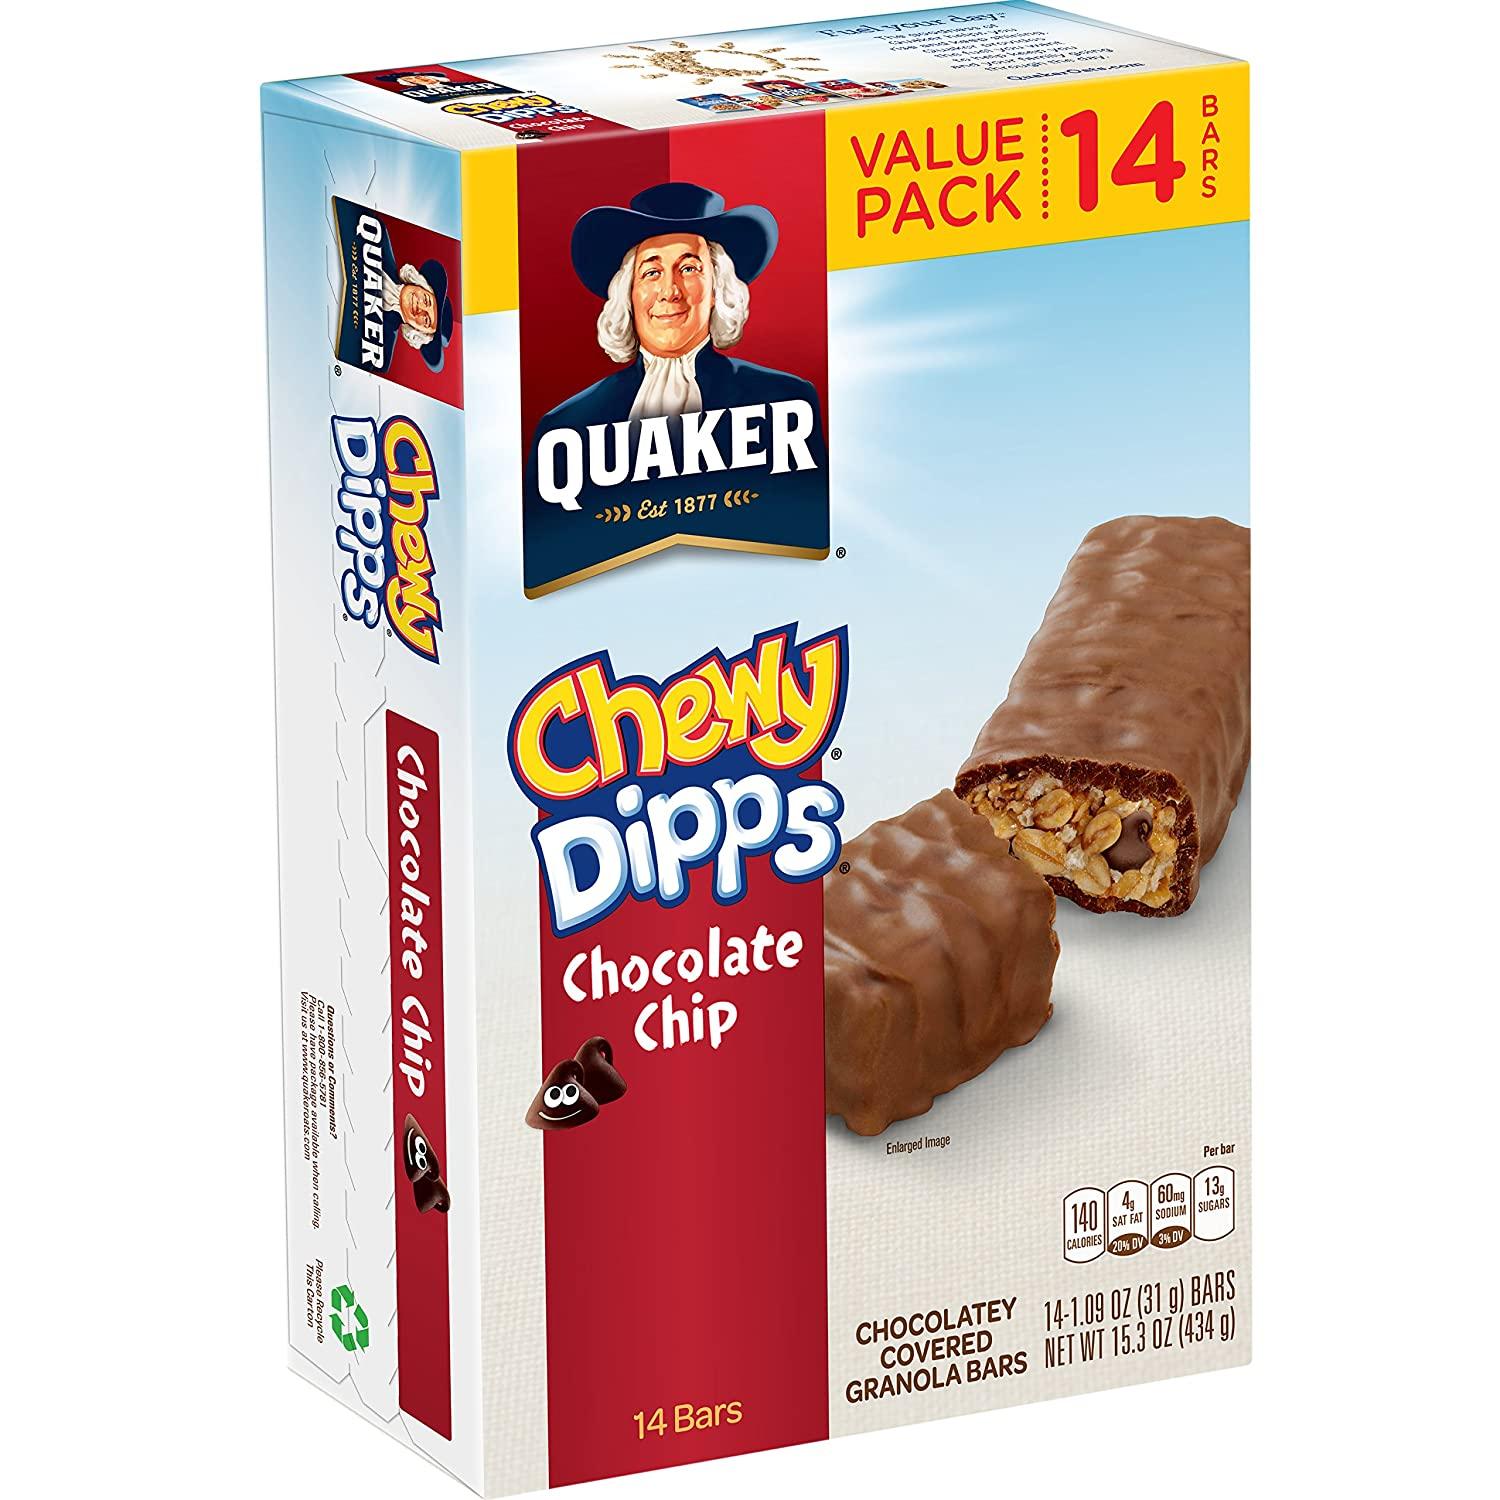 14 Quaker Chewy Dipps Chocolate Chip Granola Bars for $3.25 Shipped